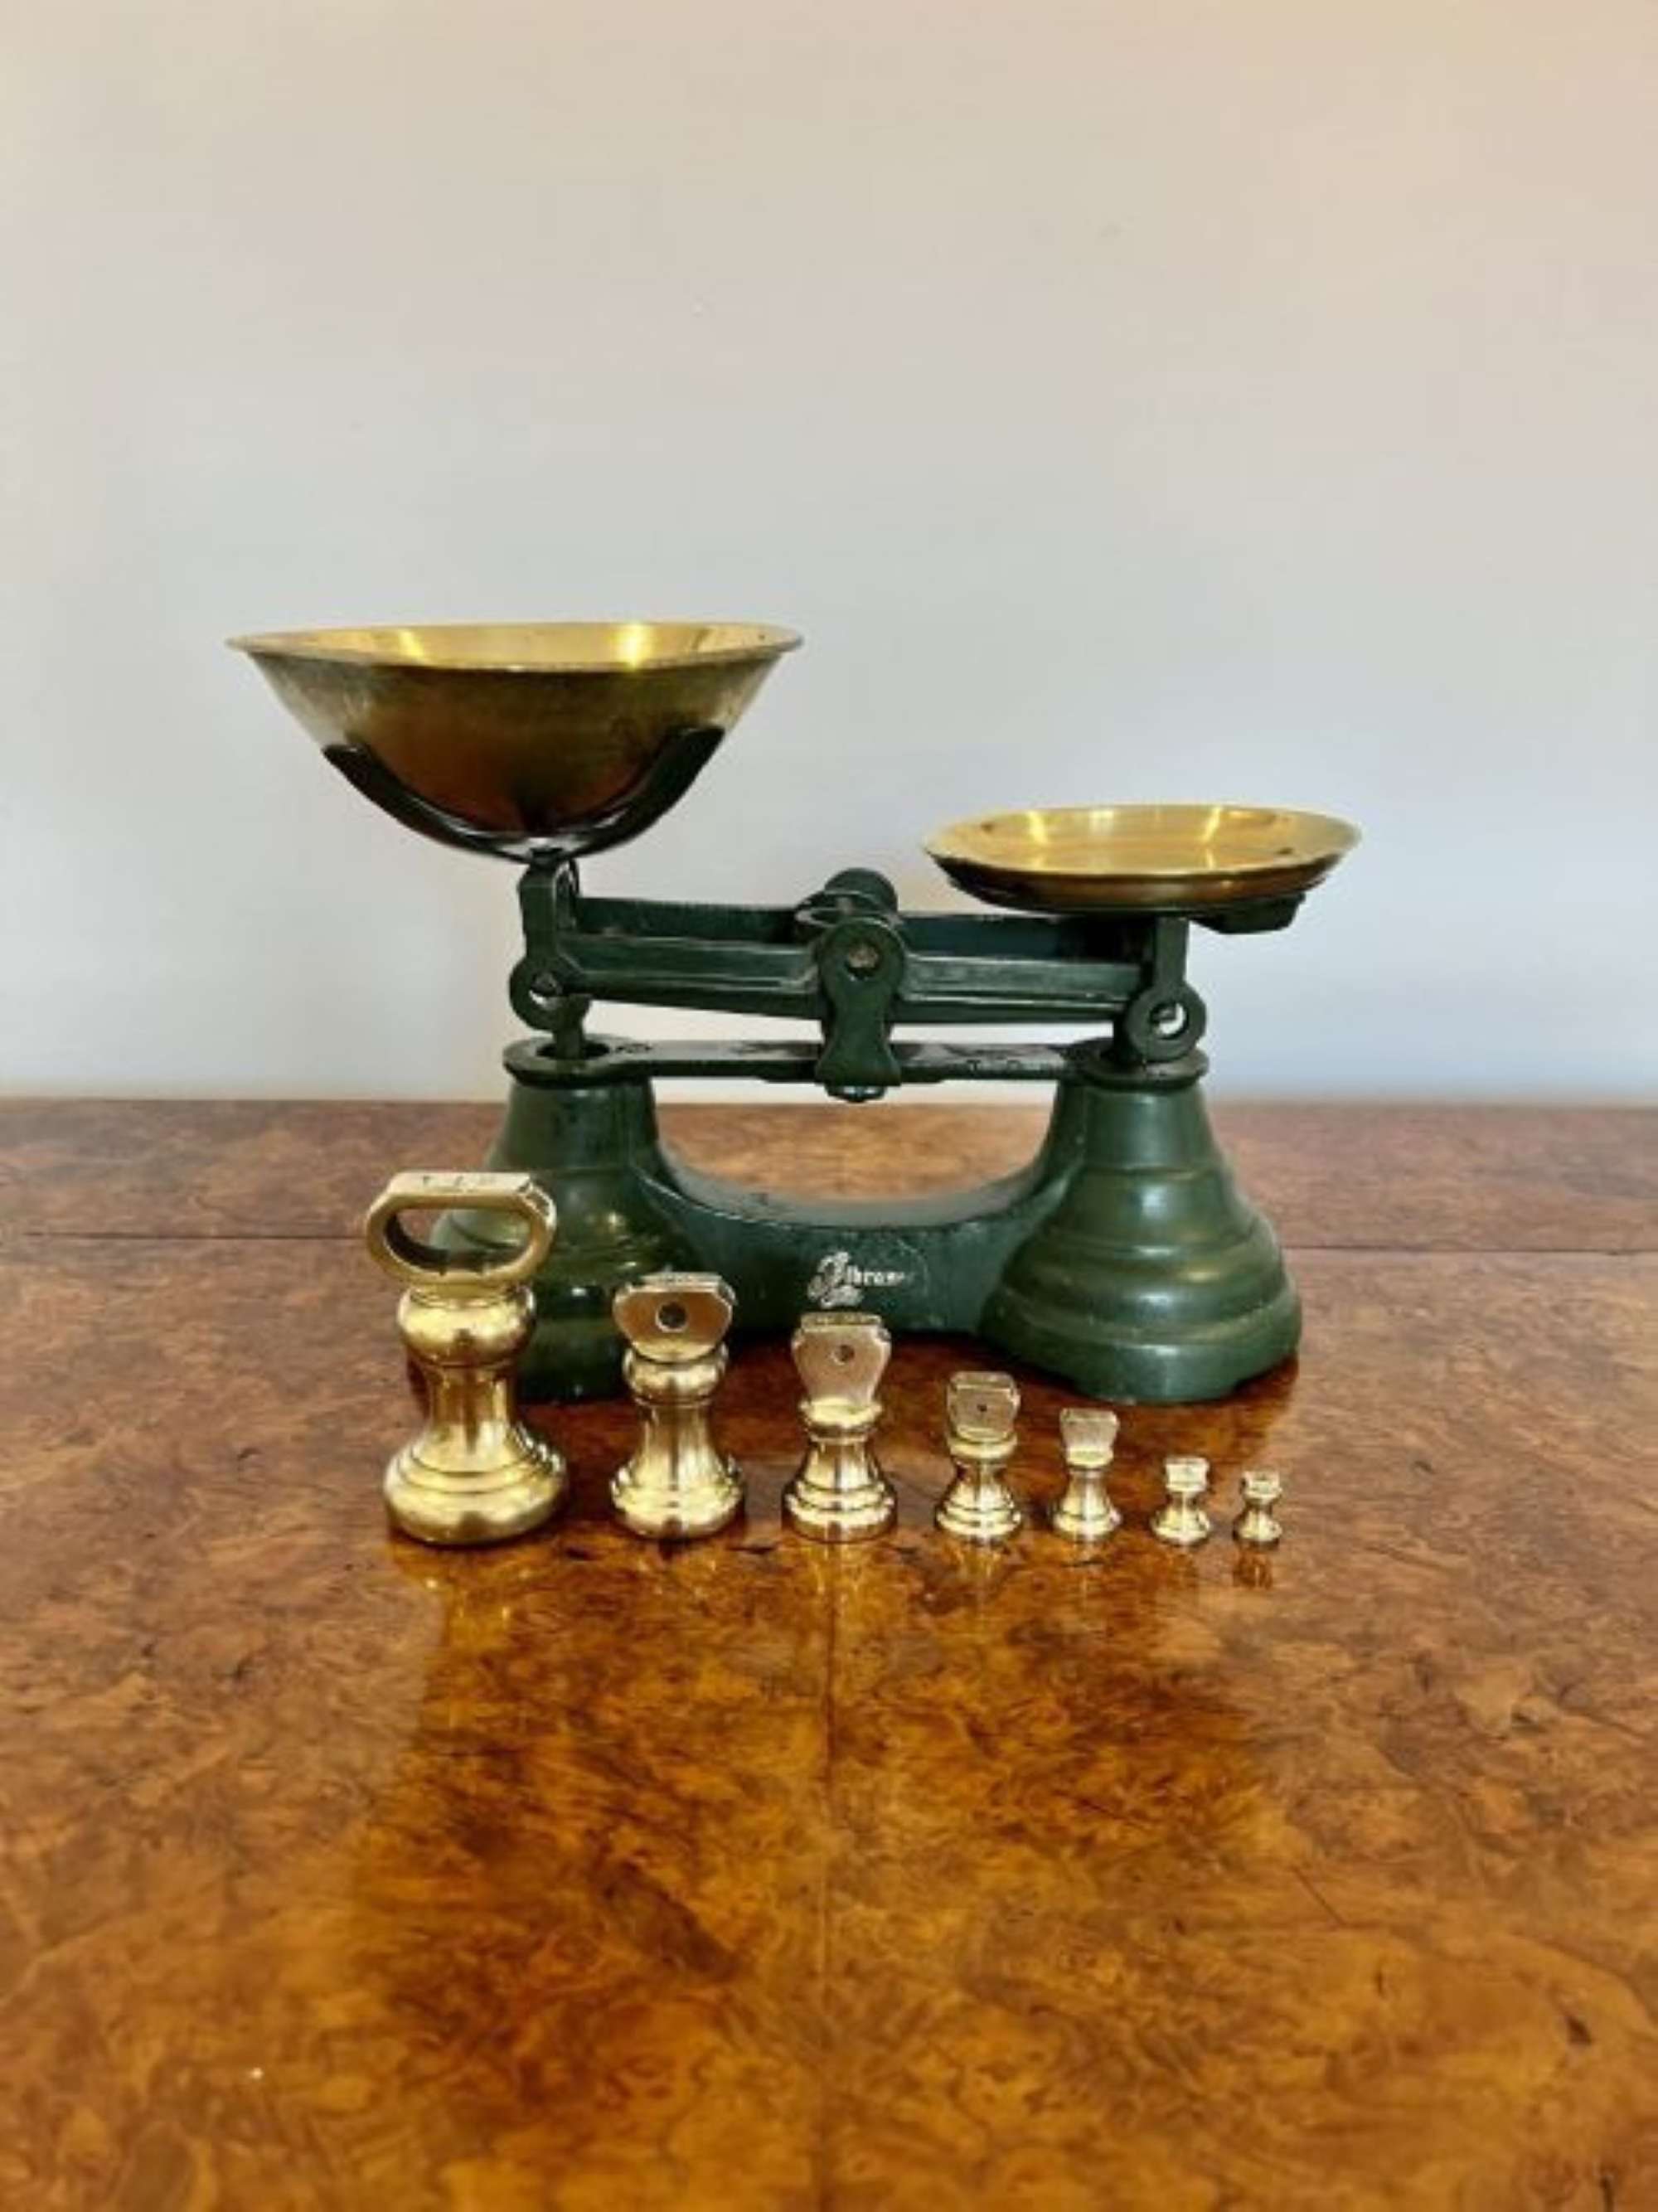 Lovey Set Of Green Antique Kitchen Scales With A Set Of Brass Bell Weights